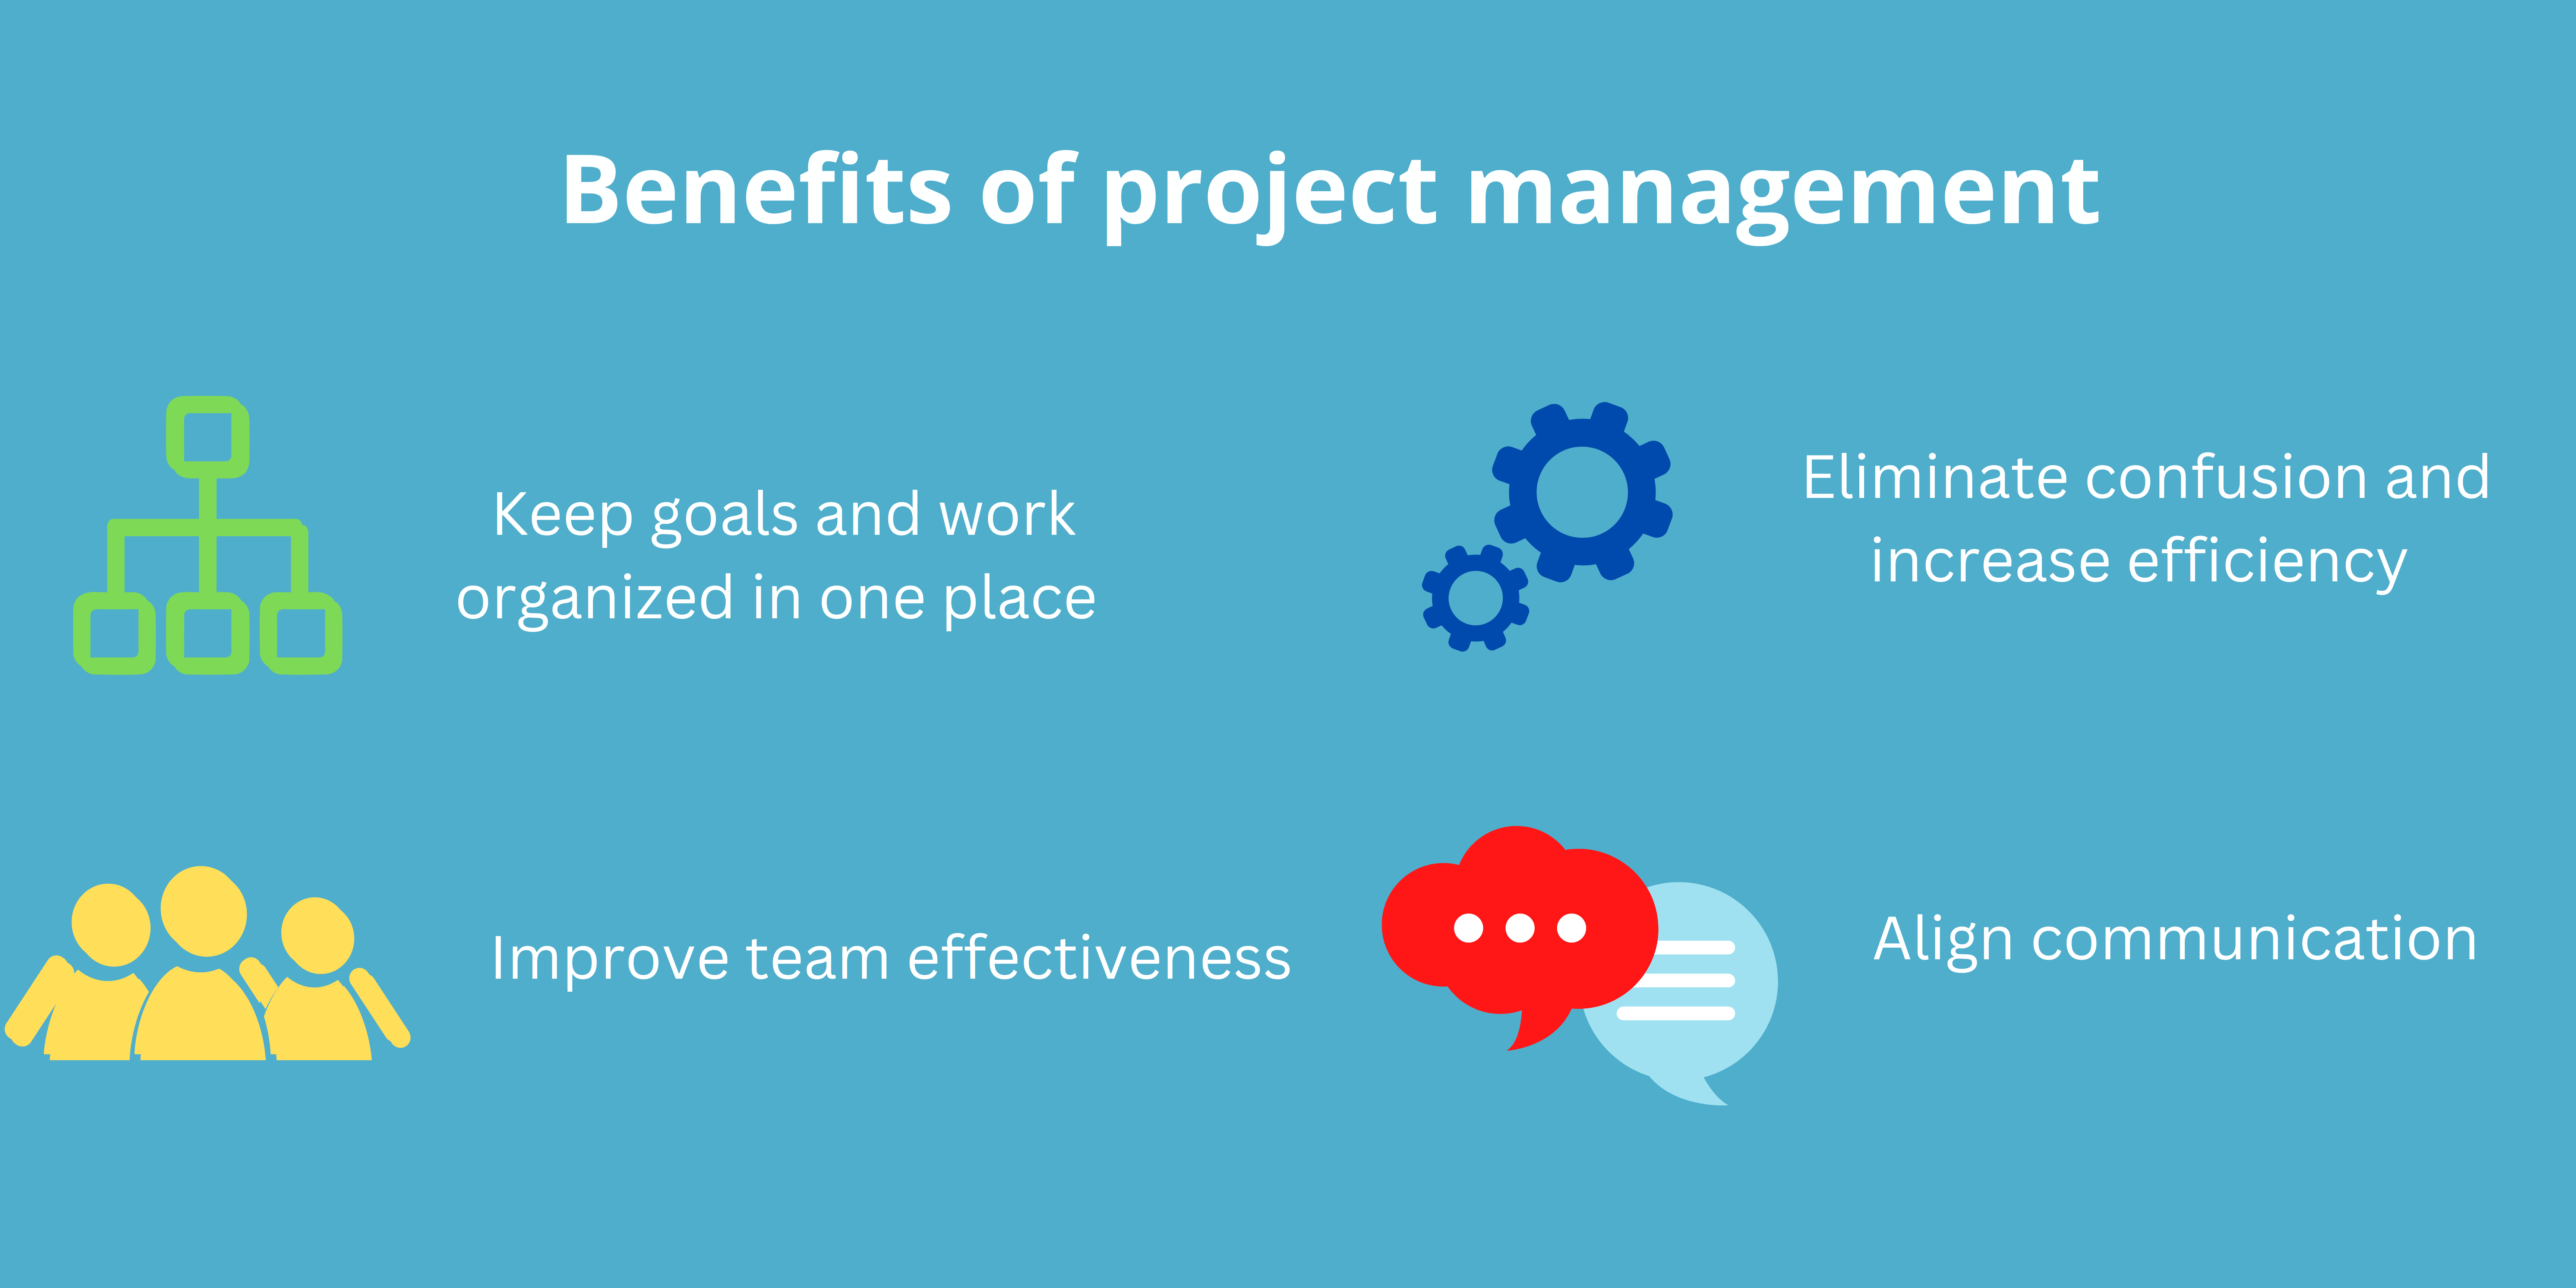 Copy of The 10 project management skills you need to have